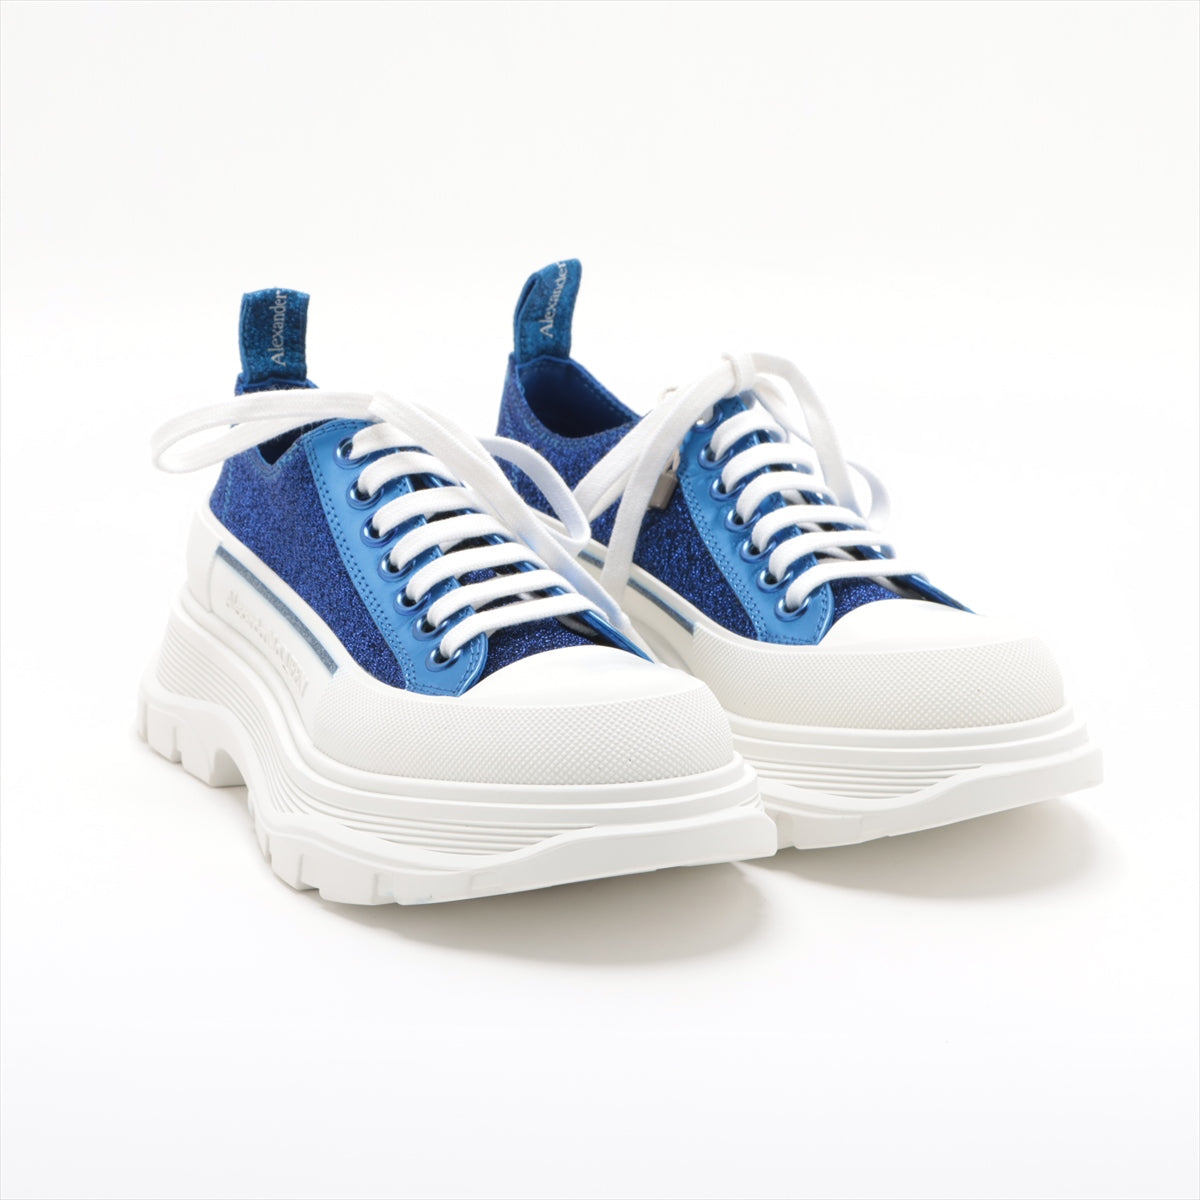 Alexander McQueen Fabric Sneakers 37 Ladies' Blue x white 685707 Glitter Is there a replacement string